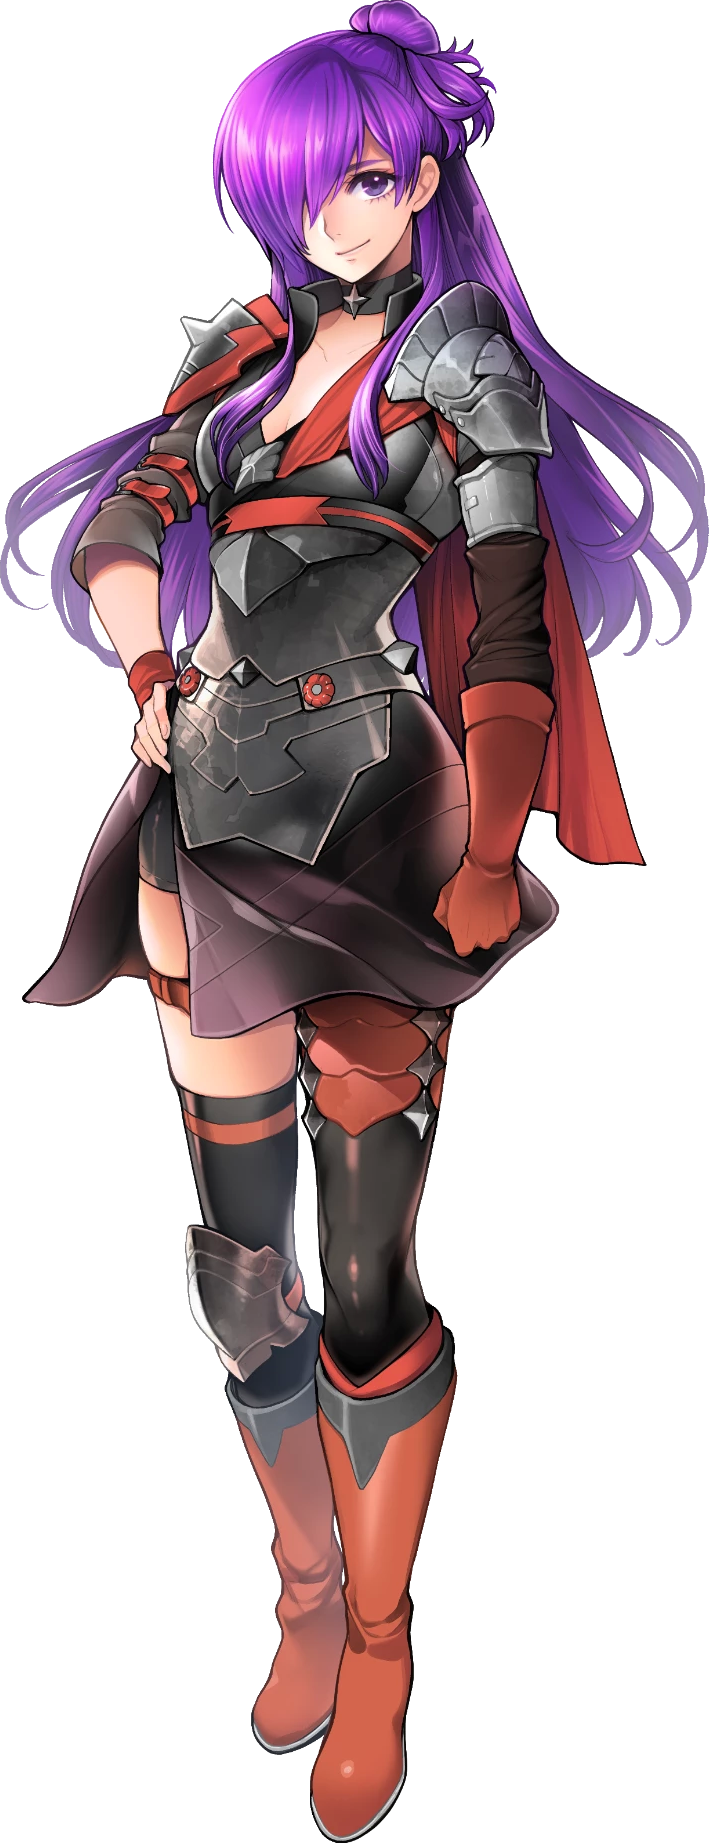 Shez's portrait from Heroes. A woman with long purple hair that covers one eye and goes down her back and a small bun on top of her head. She wears asymmetrical armor and smiles at the audience with one hand on her hip.